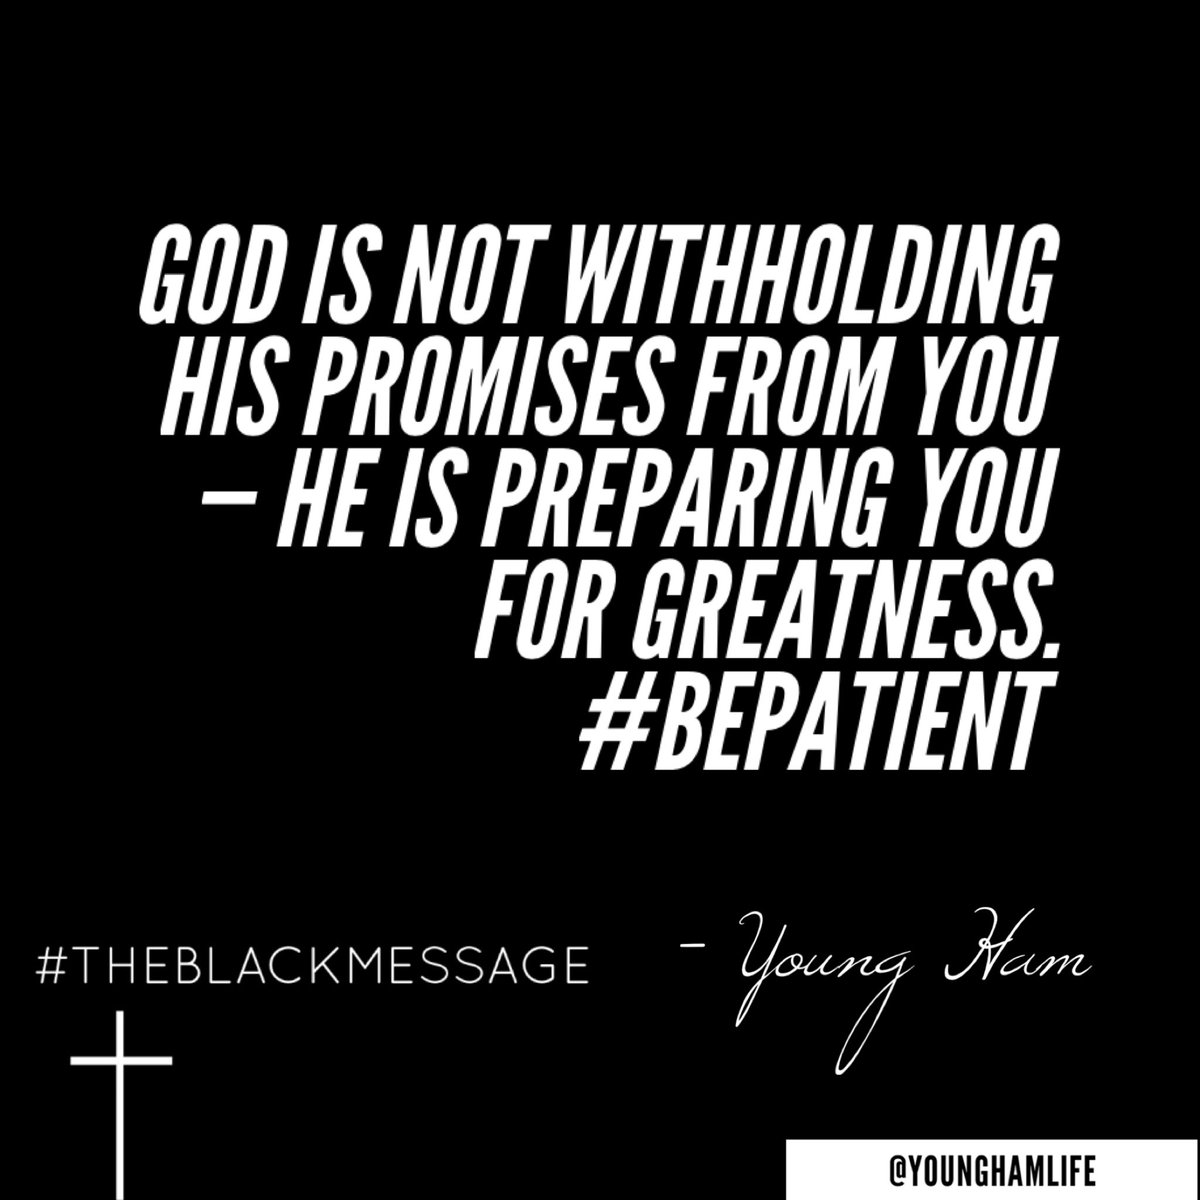 #WorshipWednesdays
Omniscient. All Knowing. Trust GOD & Be Patient

I Am @YoungHamLIFE Building A Wealthy Mind For A Wealthy Life 
.
.
.
#TheBlackMessage #YoungHamLIFE #CCLifeInc #positivevibes #successfulday #relationships #positivechanges #lovequote #besuccessful